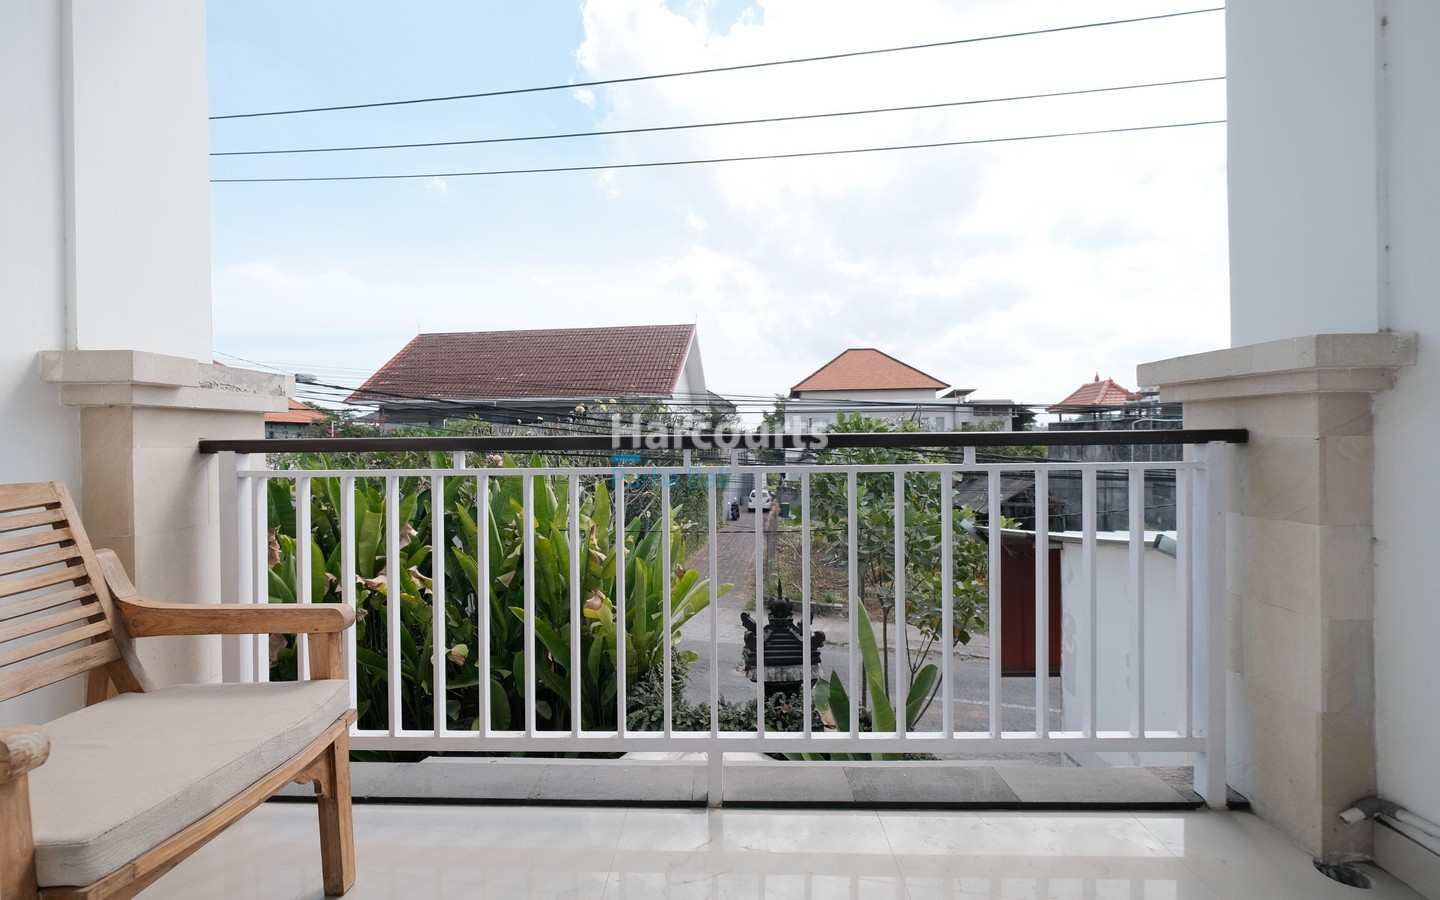 Apartments with Shop for Lease in Canggu Bali